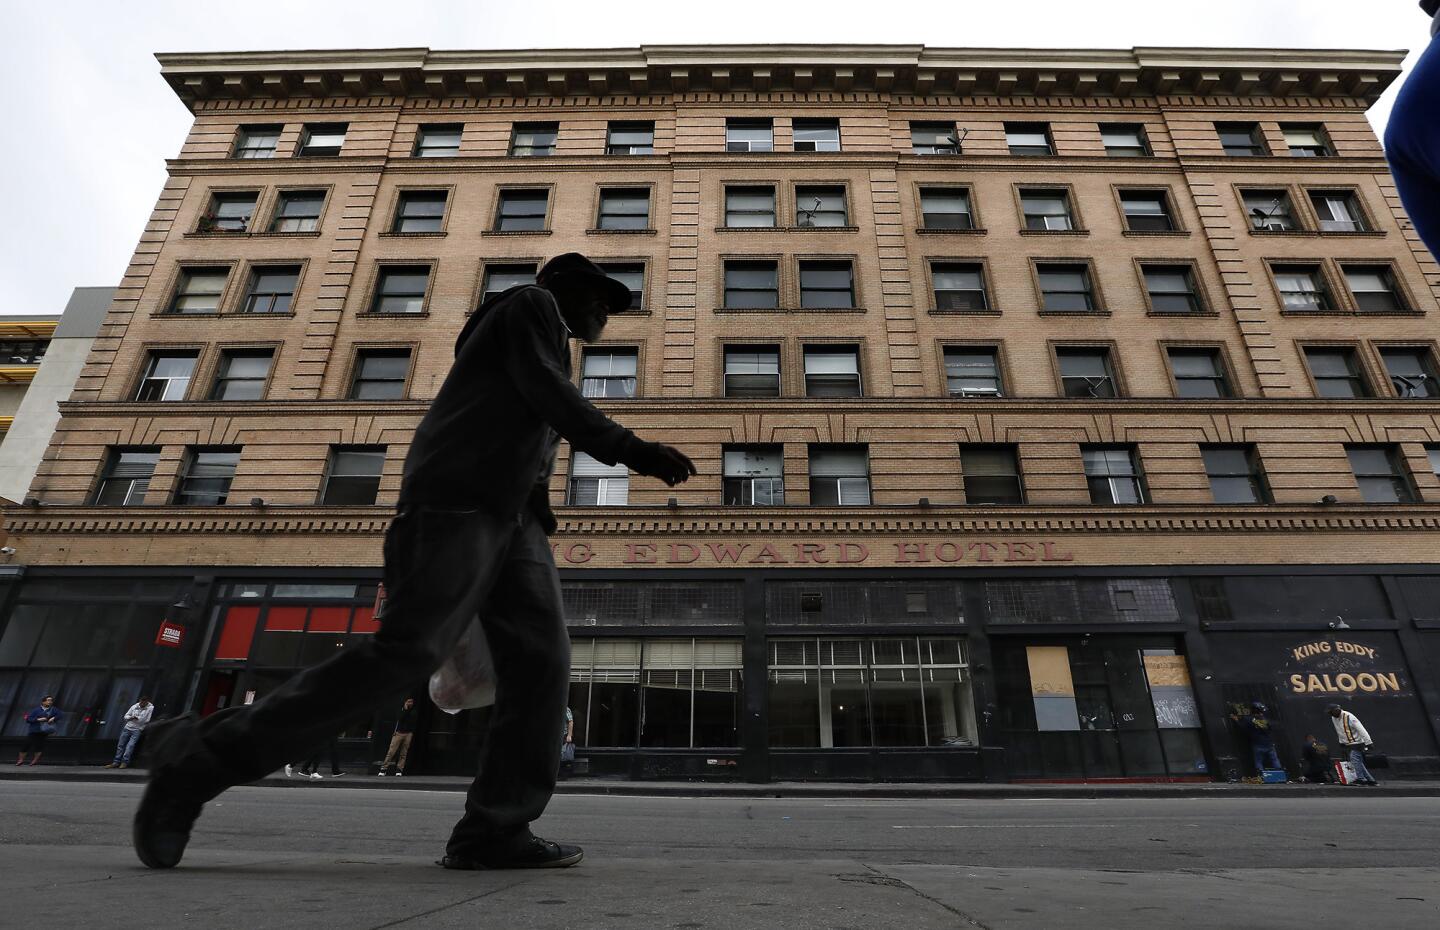 A pedestrian walks along 5th St. in downtown Los Angeles with the King Edward Hotel seen in the background. The Aids Healthcare Foundation has purchased the 106 year old hotel and plans to lease its 150 rooms to homeless people.